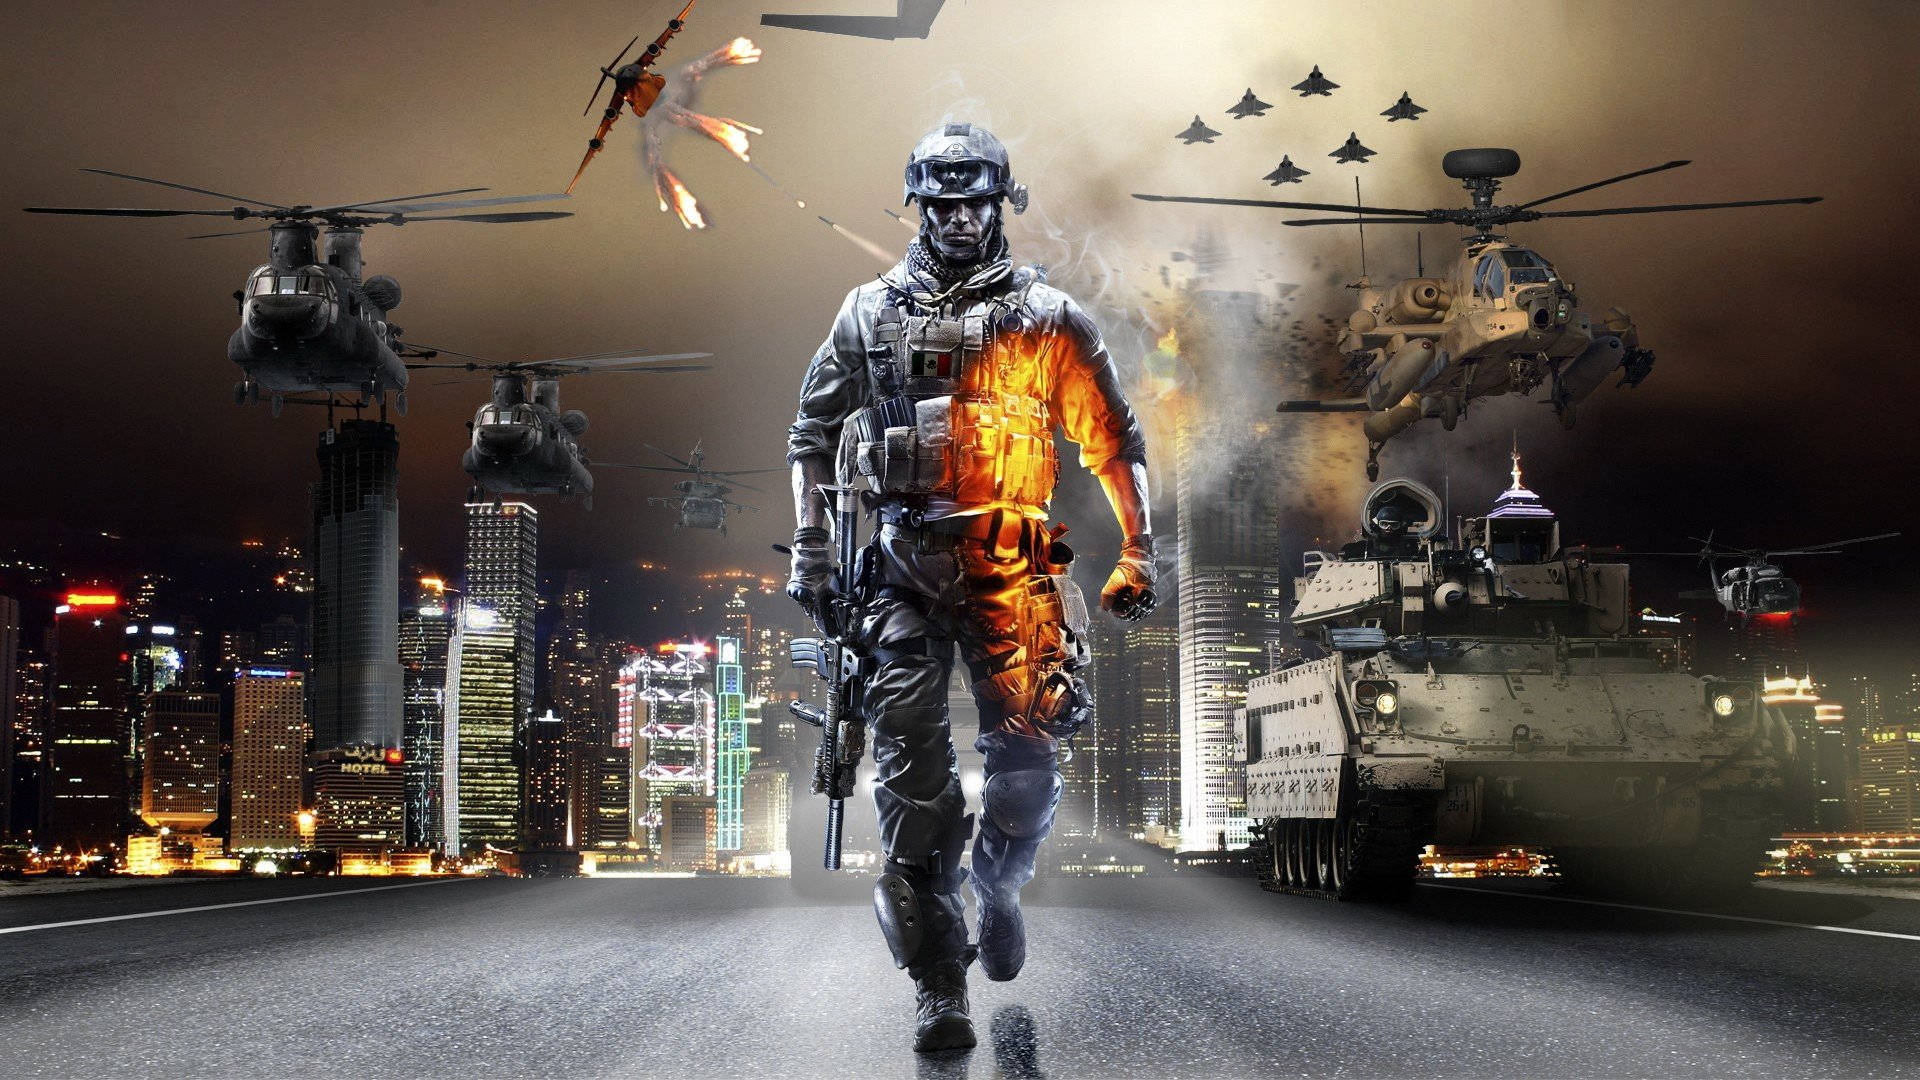 A Soldier Is Walking Down The Street With Helicopters Wallpaper